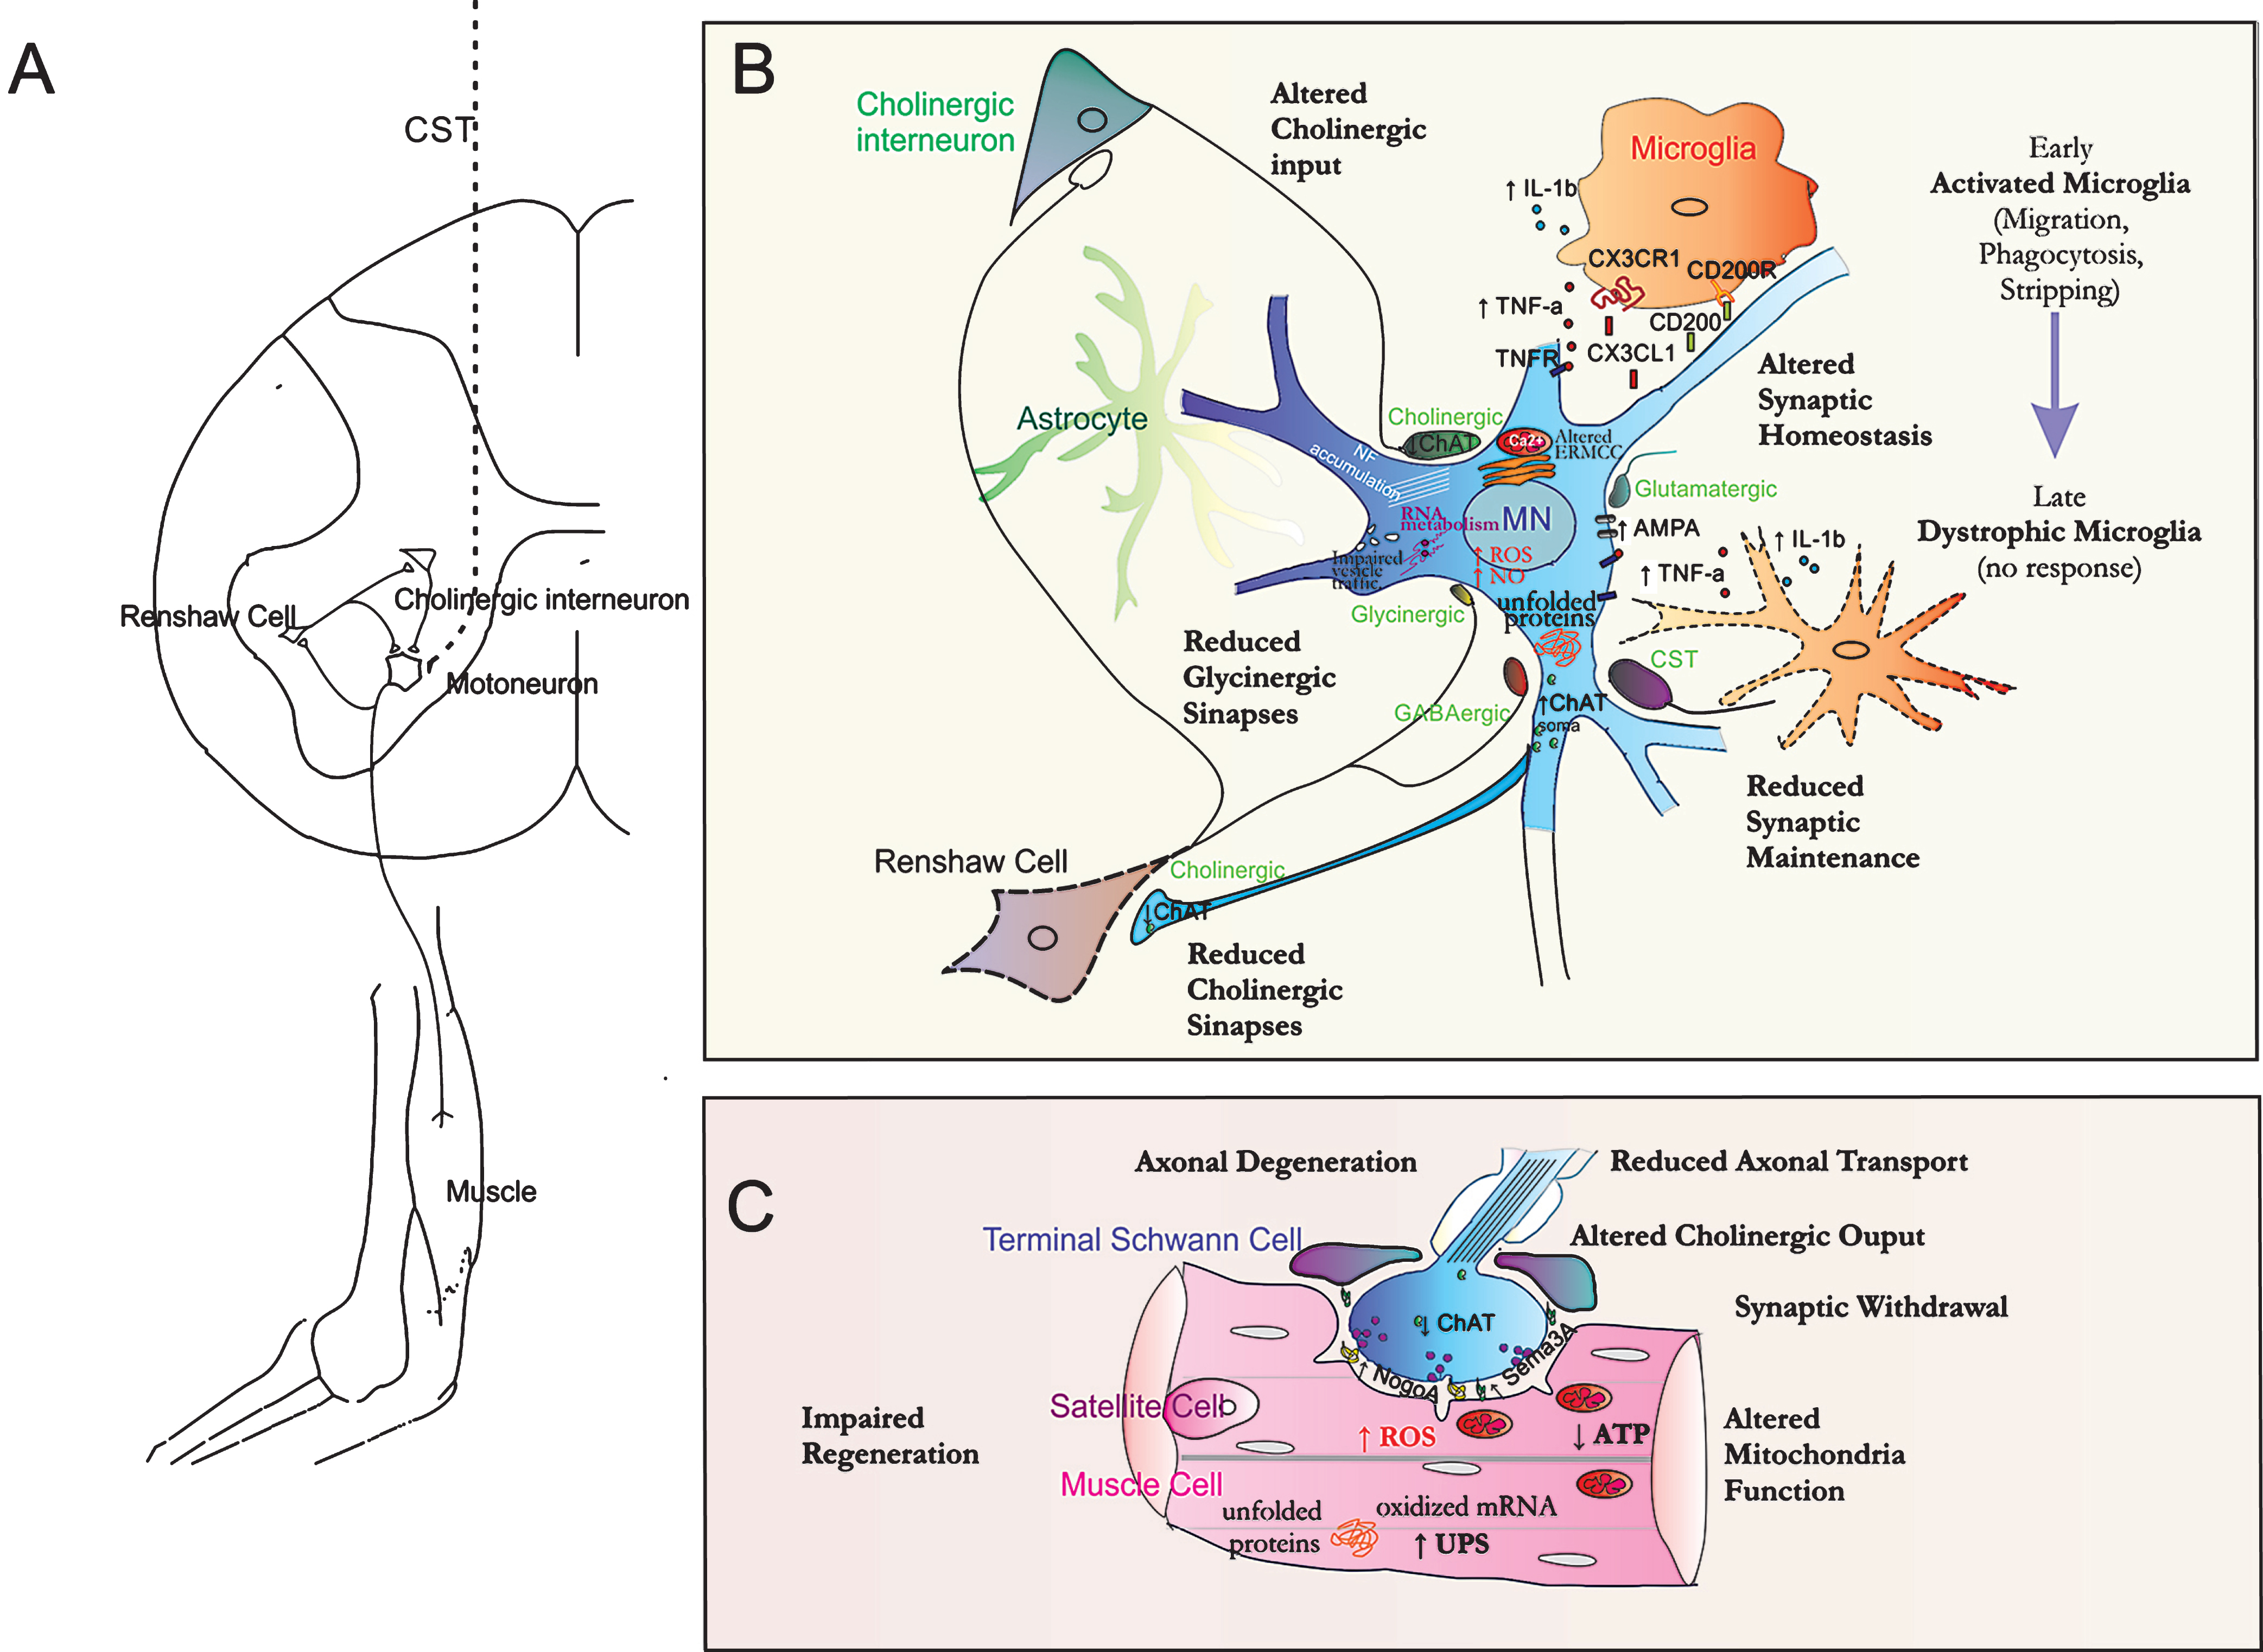 Integrative view of ALS. A. ALS is a result of the degeneration of the motor functional circuitry mainly. In humans, the corticospinal tract (CST) allows monosynaptic connection of cholinergic Betz cells in motor cortex to spinal motor neurons (MNs). At the spinal cord, MNs forme a microcircuitry with interneurons and other MNs to accomplish the efferent motor signaling. Cholinergic interneurons at lamina X synapse in MNs regulate motor behavior and Renshaw inhibitory interneurons receive inputs form MN axon collaterals to synapse, that turn to MNs and conforms a negative feedback regulation. B. ALS can be considered as a multi-component disease that affects synaptic communication. Several terminal boutons that make synapses on MNs are structural or functional affected, such as glycinergic and cholinergic ones. The number of glycinergic synapses from inhibitory Renshaw cells is reduced and the density of these cells has been found decreased in later stages of ALS. Choline acetyltransferase (ChAT) content is early diminished from boutons apposed on MNs and from their terminals on Renshaw cells. Altogether these variations match with the altered recurrent inhibition found in patients and contribute to imbalance in inhibitory/excitatory homeostasis. MNs present altered molecular environment with incapability to accomplish several neuroprotective programs (such as autophagy, unfolded protein response (UPR), proteosomal activity) that lead to a failure in handling protein homeostasis and aggregation, which are related to a reduced neuronal survival. There exists a persistent dysregulation in the endoplasmic reticulum (ER)-mitochondria calcium cycle (ERMCC) that couple energy from mitochondria to protein processing in the ER and participates in AMPA-mediated synaptic activity. This leads to excitotoxicity and abundant reactive oxygen species (ROS) and nitric oxide (NO) production. In addition, difficulties in vesicle trafficking may occur in soma and along the axon that difficult synaptic communication with the muscle and other cells. Thus, the machinery for local protein translation in dendrites and synapses present alterations that involves the mRNA silencing foci at which TDP-43 and FUS/TLS participate with consequent mRNA metabolism alterations. Microglia contribute to synaptic scaling and maintenance by cross-talk to MNs through TNFα/TNFR1, CX3CL1/CX3CR1 and CD200/CD200R axis. Activation of CX3CR1 in microglia are part of the “off” signals that switch microglia from the activated state to the resting one, which may be interrupted in ALS, at least in some of the ALS stages. Indeed, in later stages, microglia become non-responsive and dystrophic, a phenotype that follows the chronic activation and the release of pro-inflammatory cytokines, such as IL1-beta and TNF-alpha. Activation of TNFR1 in neurons classically lead to apoptosis but also increases AMPA receptors at the membrane. Besides, the composition and editing of AMPA receptors which is altered in ALS contribute to excitotoxicity due to changes in their ion permeability. C. Neuromuscular junction (NMJ) fragility is promoted by disturbances in several cellular components and lead to impaired MN transmission and regeneration. At the axonal terminal, the transport is altered and, in particular, there is a reduced ChAT transport which can lead to a decrease in immediately available transmitter pool, as well as to a reduced spontaneous acetylcholine release that weakens NMJ. Synaptic withdrawn may be induced by the release of inhibitors of regeneration like Nogo A or Semaphorin 3A from muscle or terminal Schwann cells, respectively. Myofiber atrophy is one of the earliest events in ALS. Muscle cell metabolism and regeneration is altered. There exists mitochondria function defects promoting ATP reduction, disturbances of calcium buffering capacity and oxidative stress exrcerbated by muscle training and muscle hypermetabolism that leads to a rise in oxygen species, which contribute to oxidation of mRNAs and altered miRNA biogenesis. These features contribute to a reduced capacity for muscle regeneration accompanied by an impaired proliferative potential of satellite cells that lead this capacity. Finally, the presence of protein aggregates in the muscle may overshoot protein clearance systems, such as proteasomal system, which contribute to muscle wasting and energy depletion. UPS, ubiquitin-proteasome system.